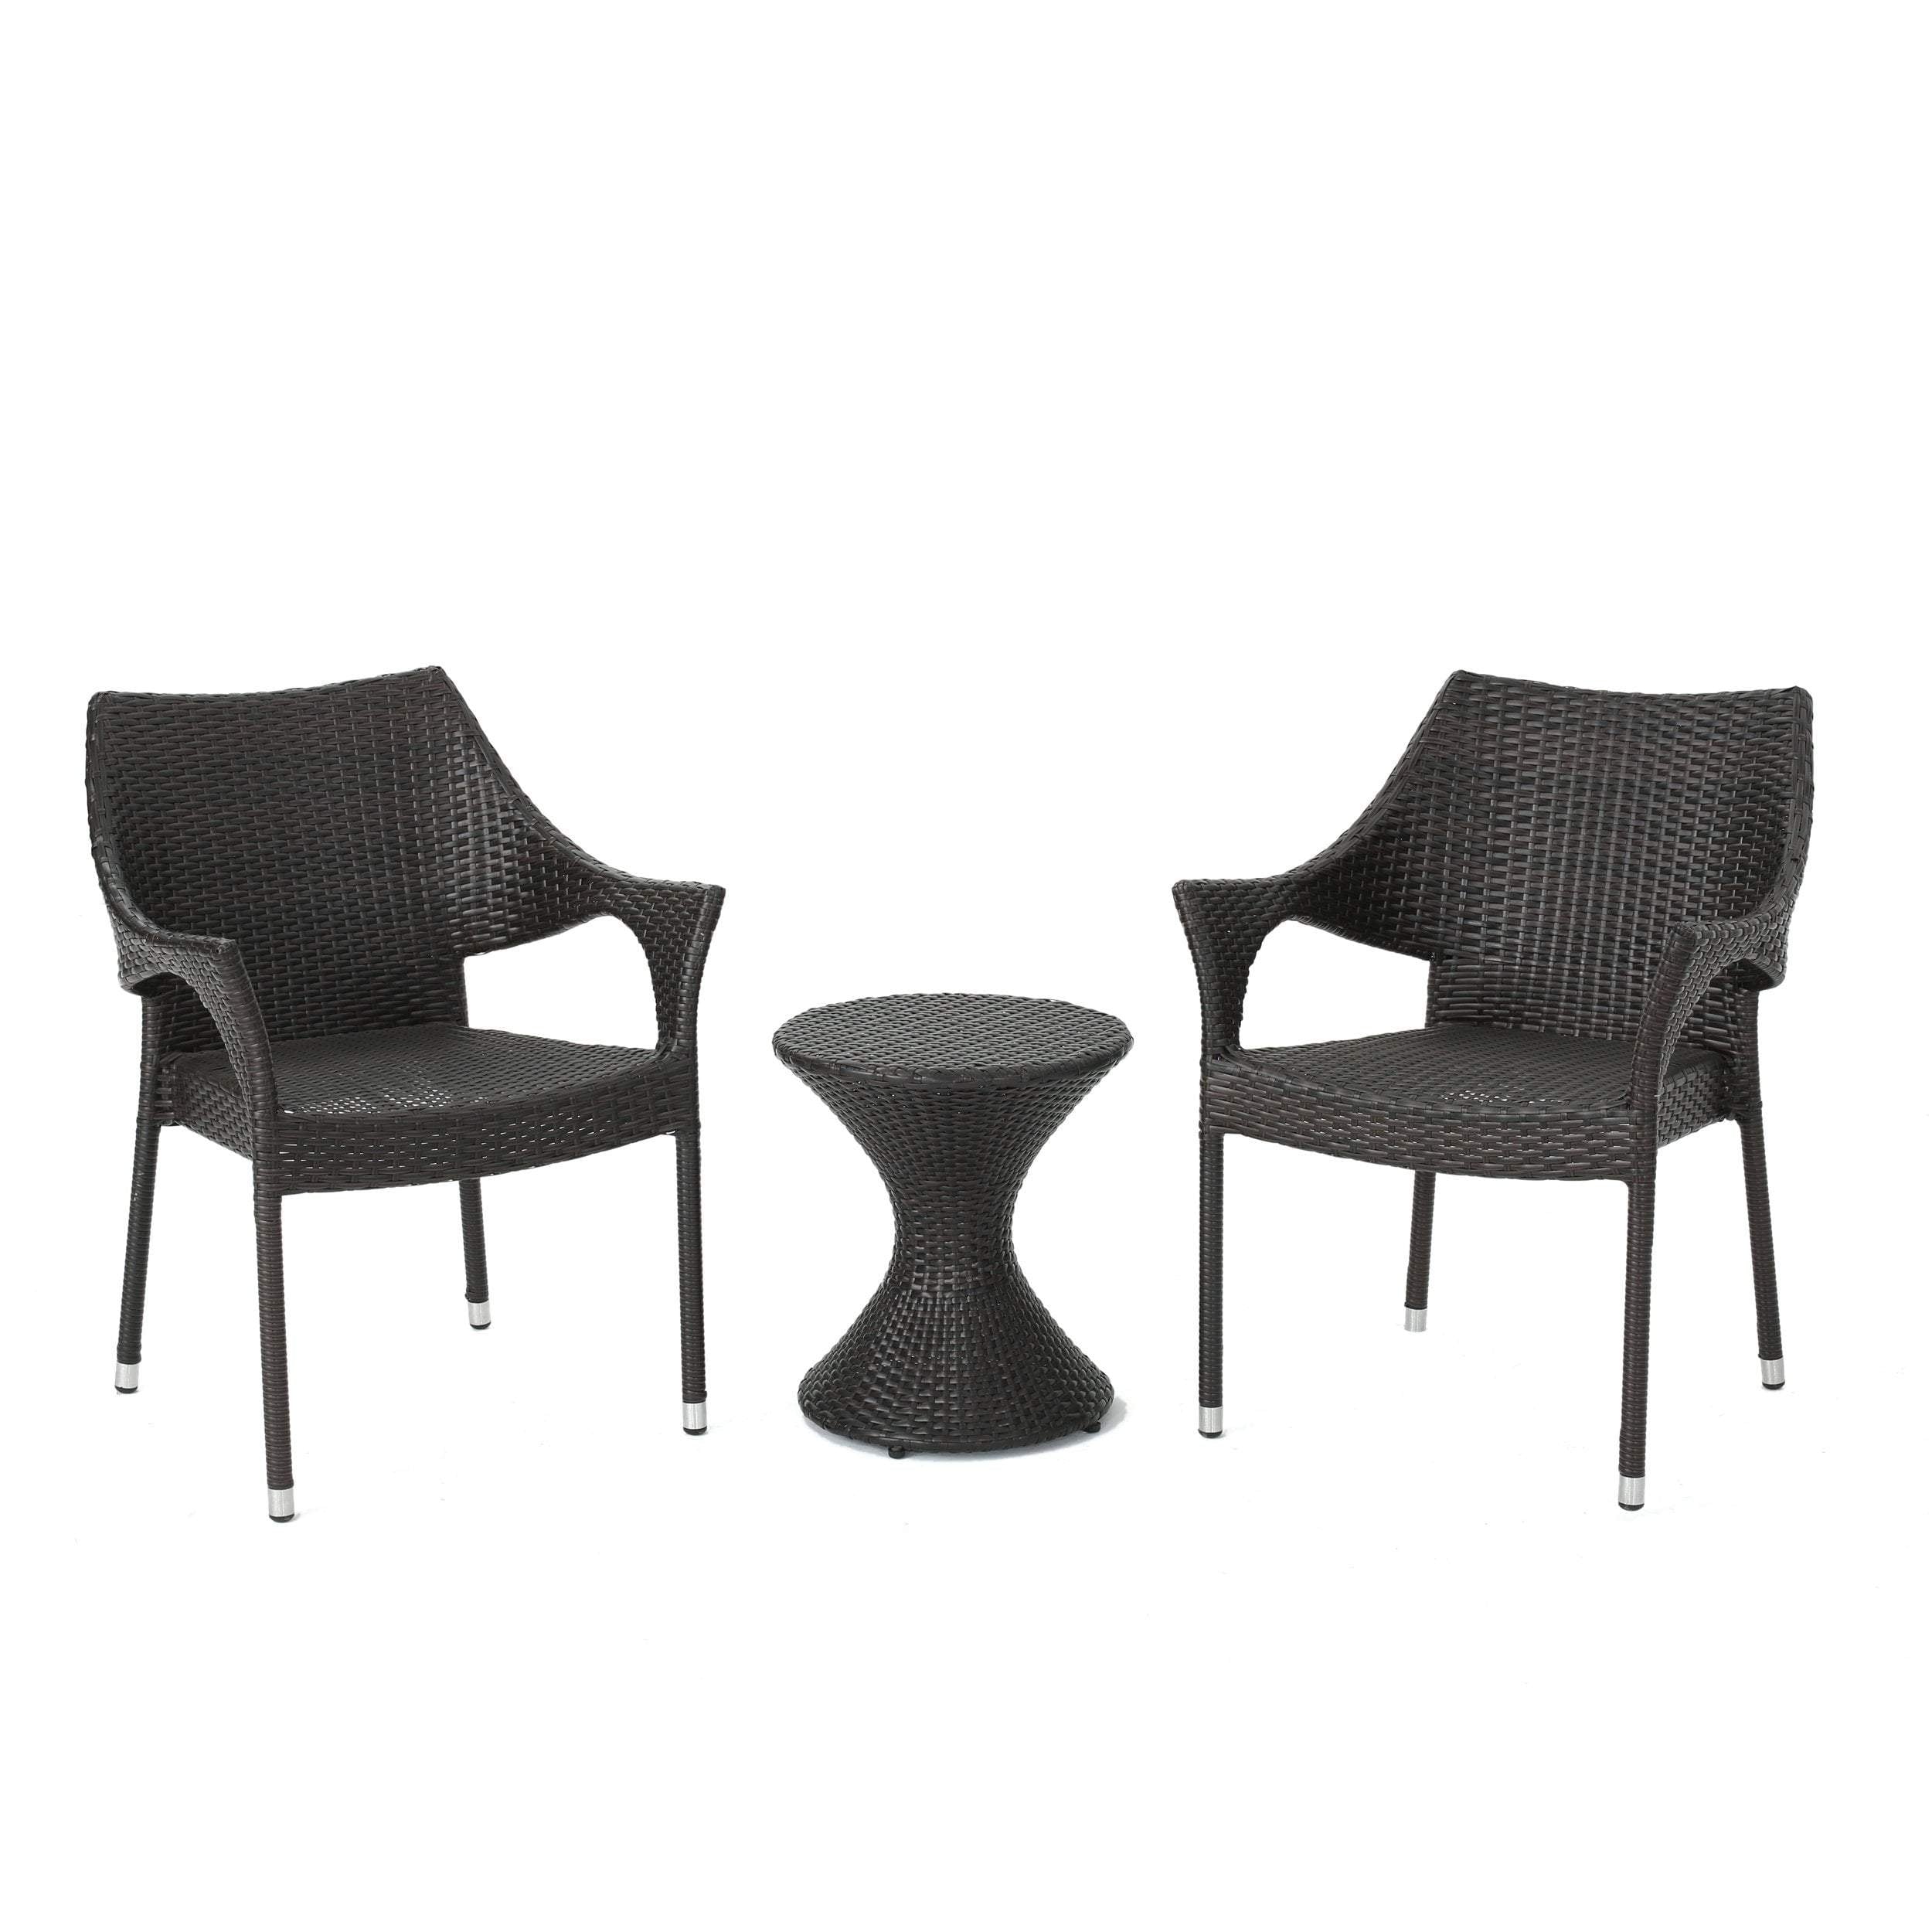 3 piece rattan chat set with stacking chairs and hourglass side table